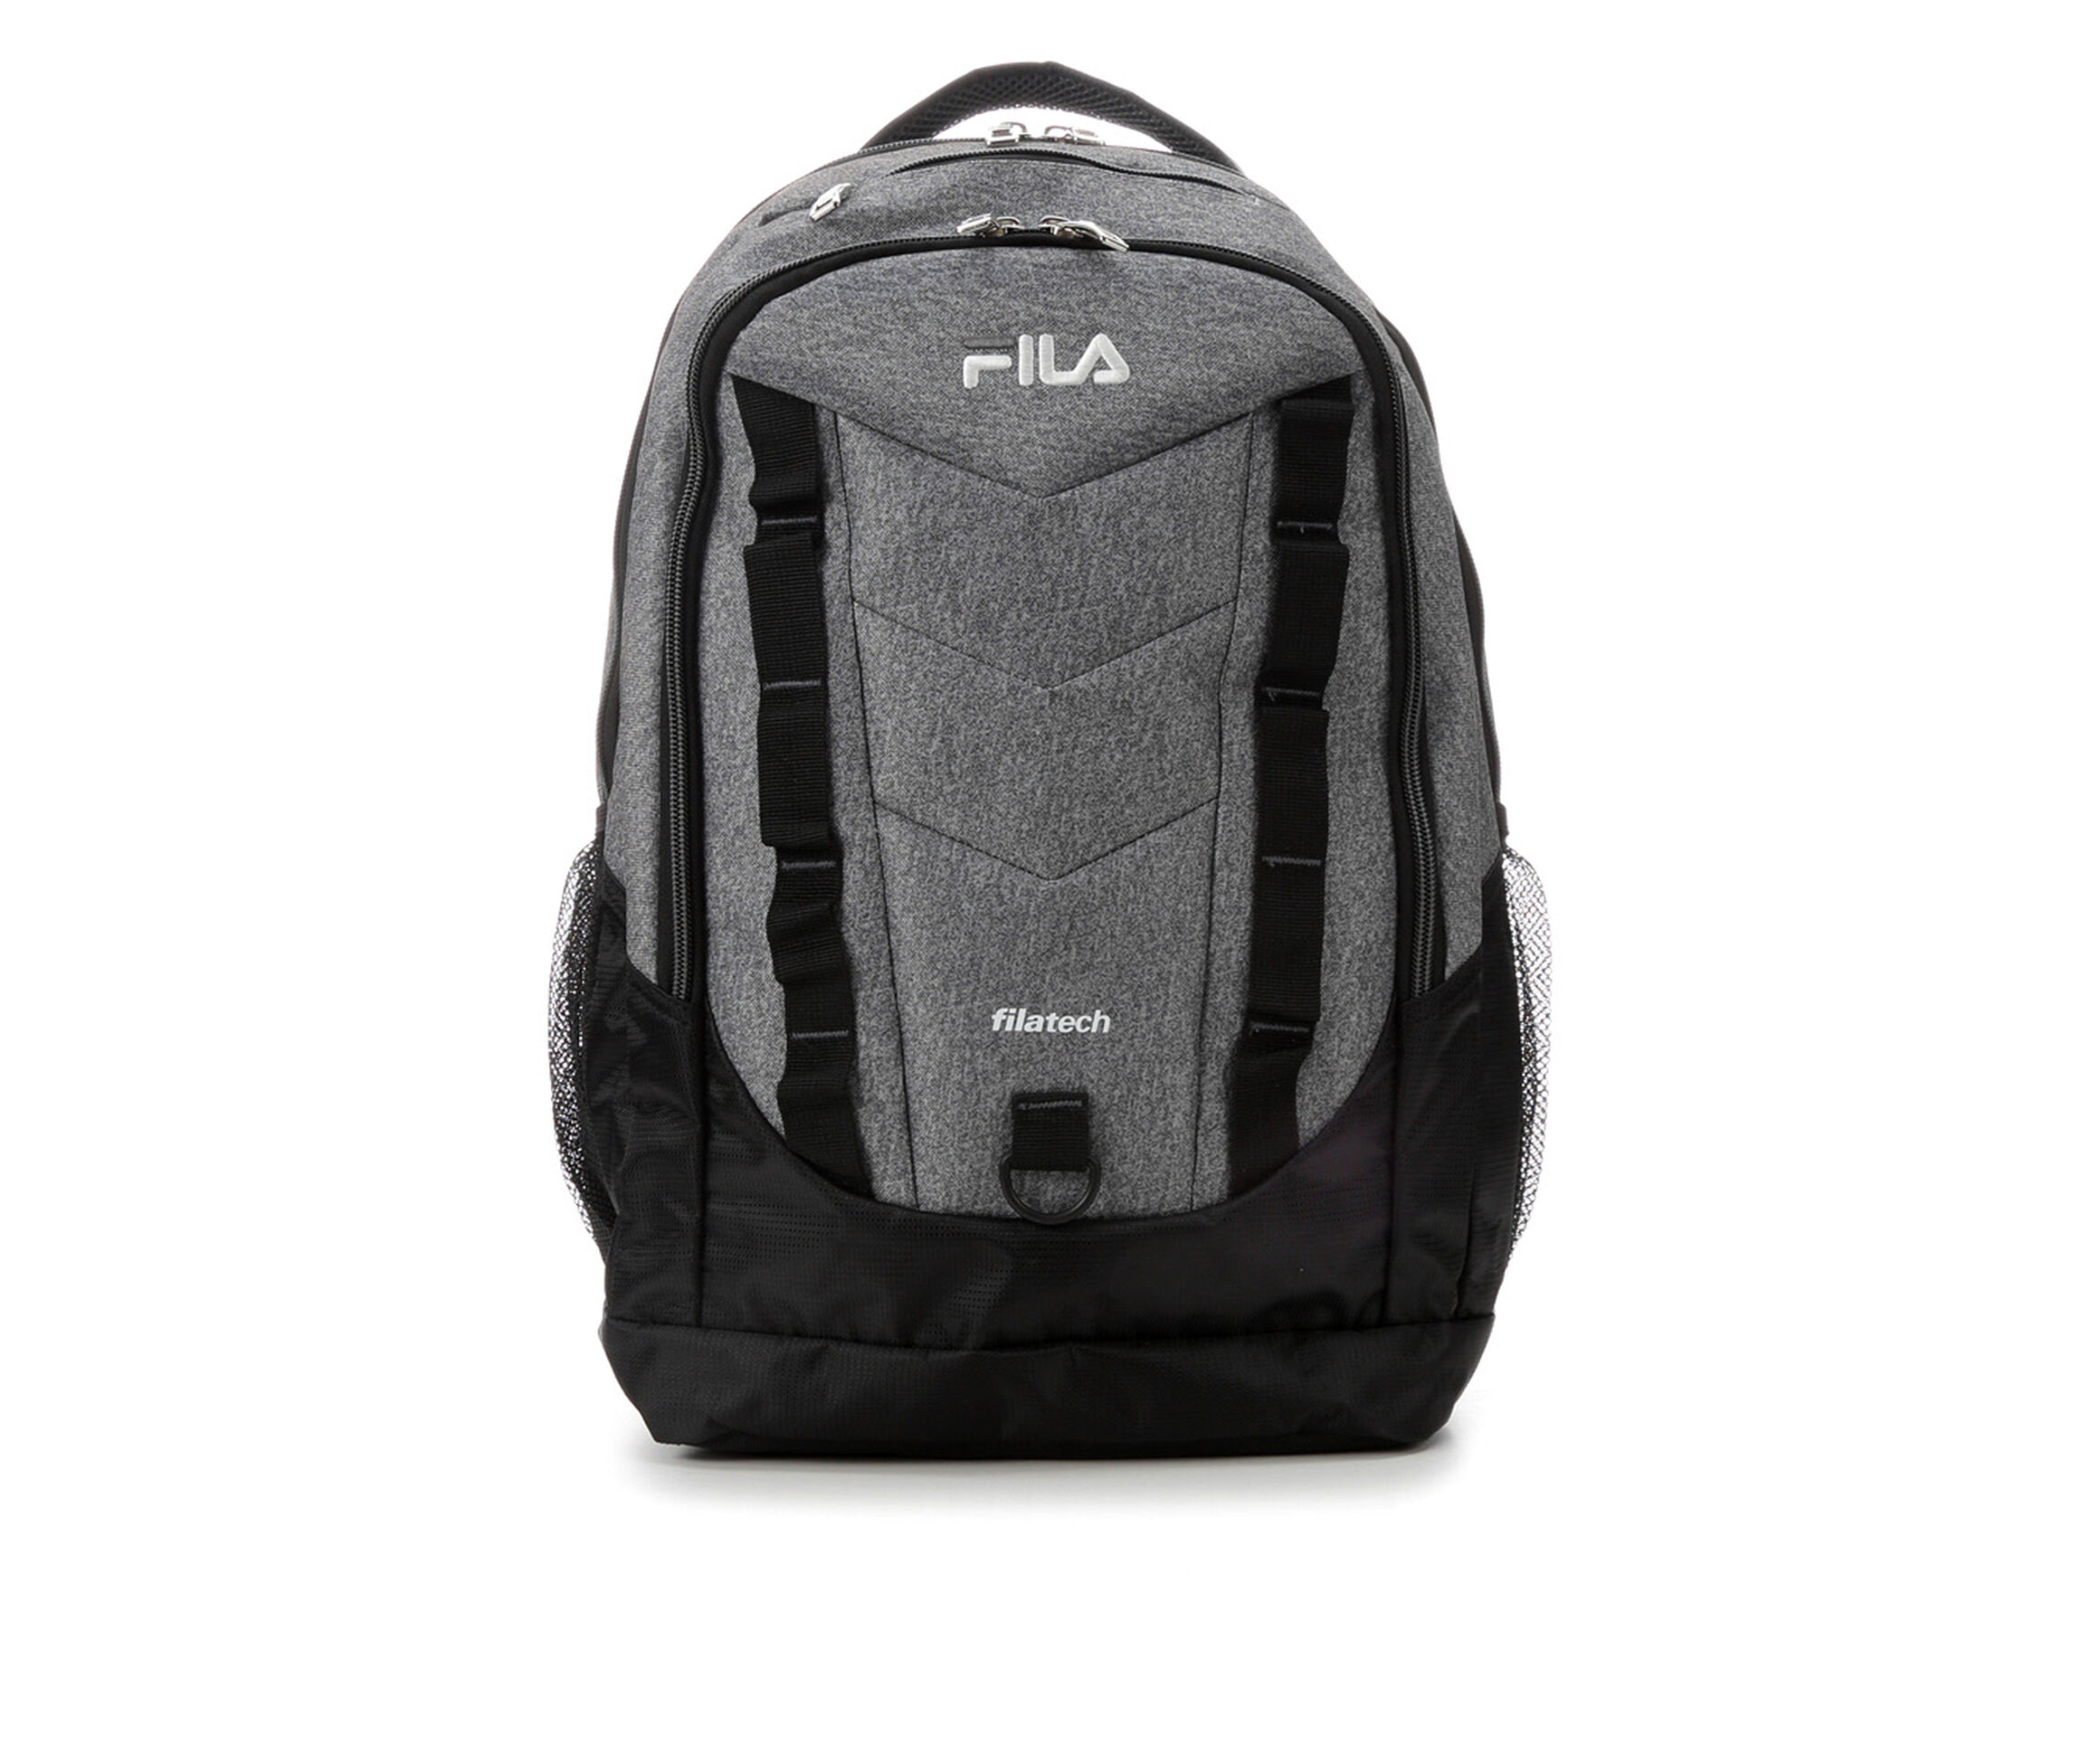 Fila accessories backpacks and lunch boxes | Shoe Carnival